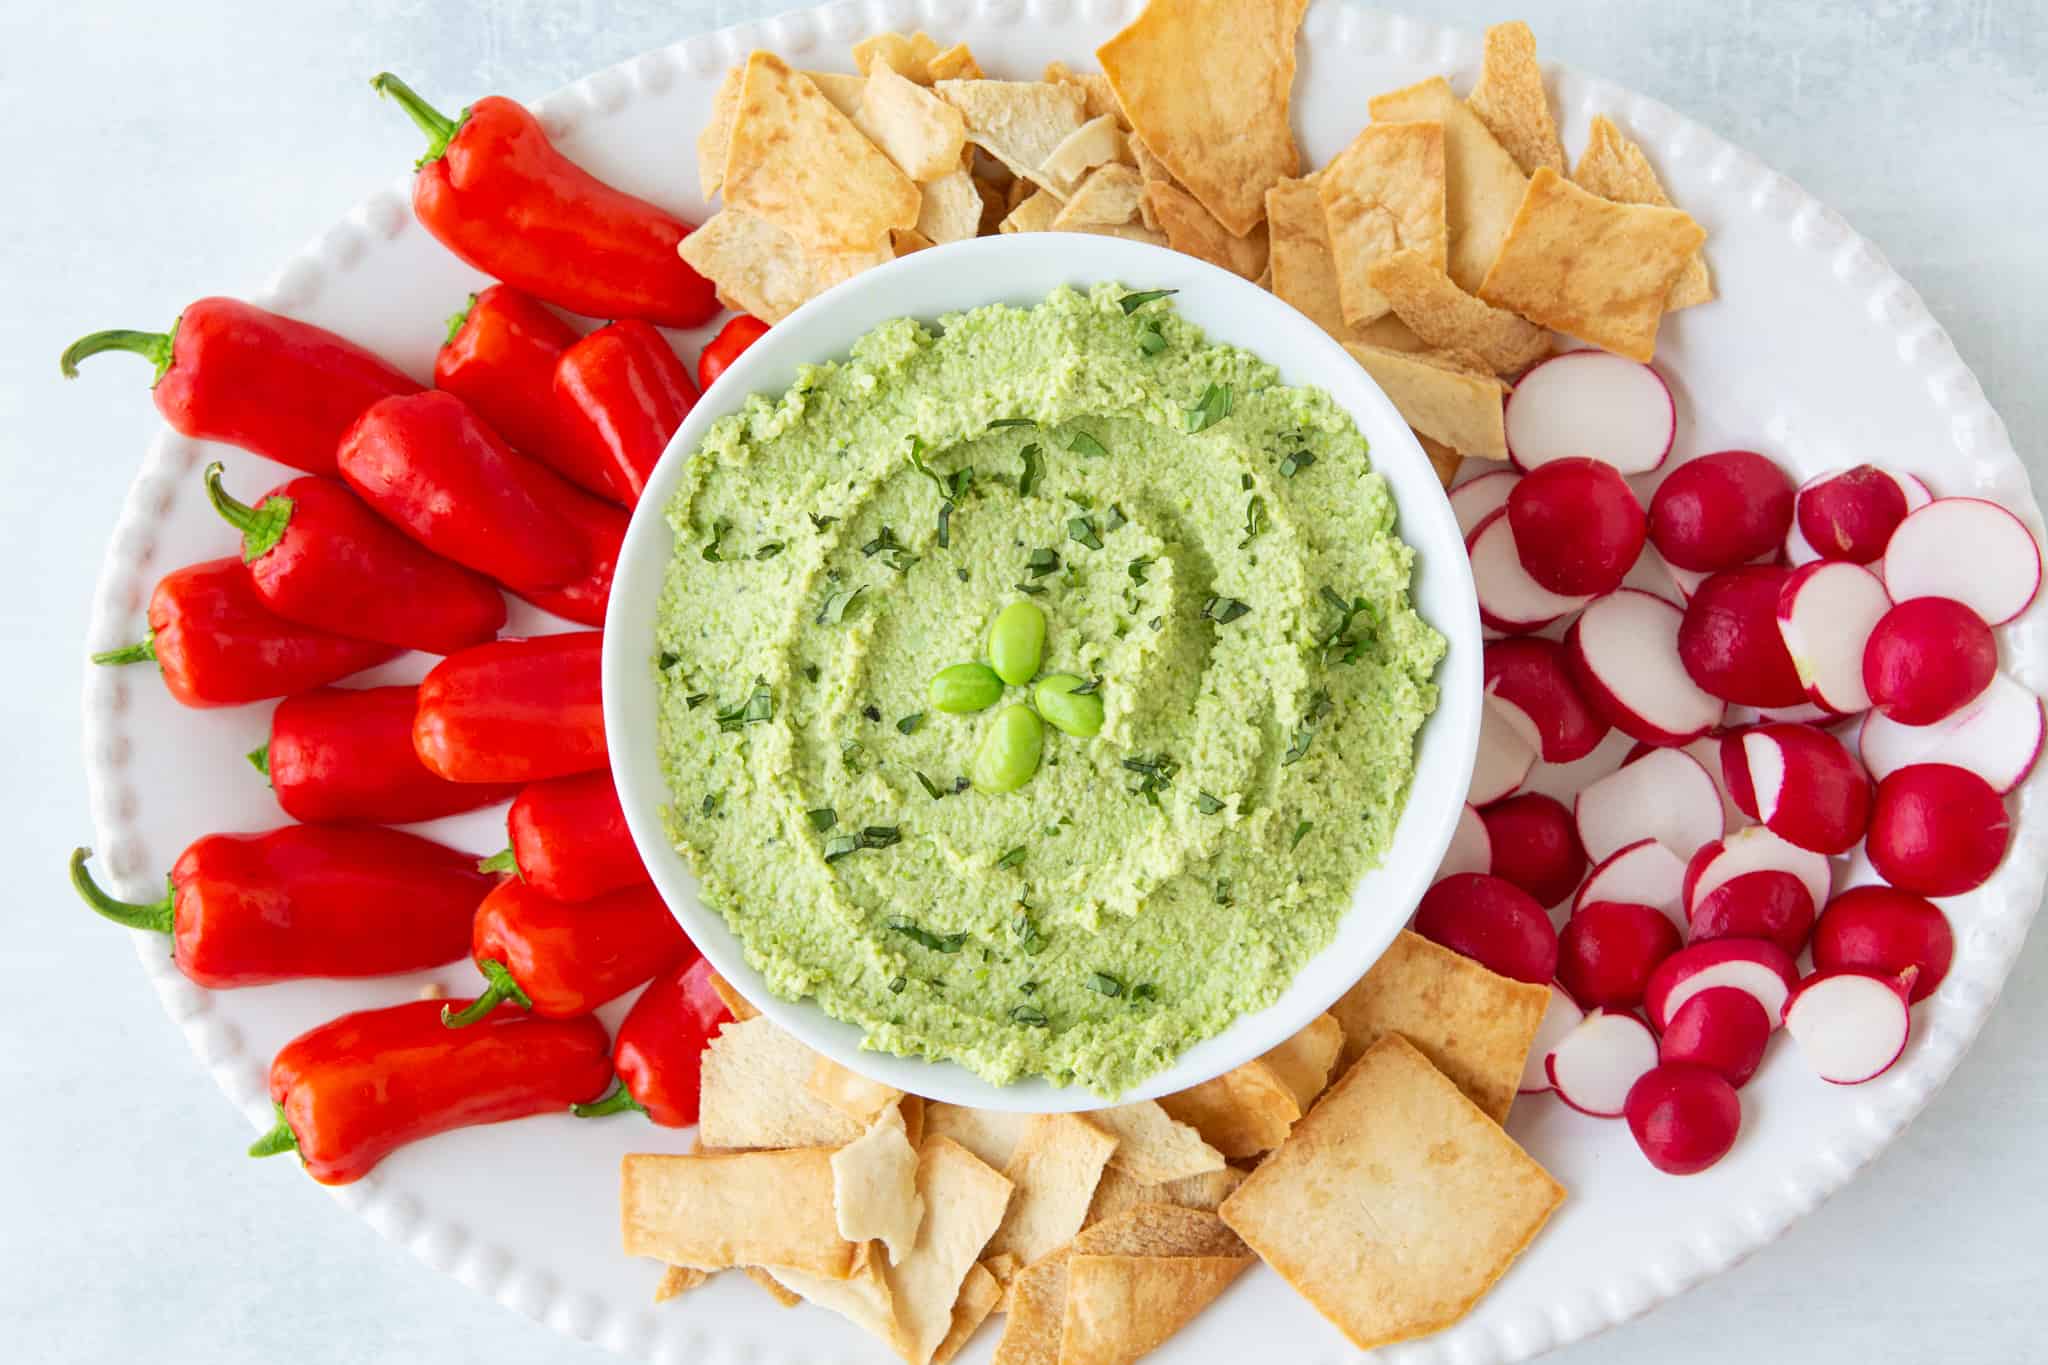 Edamame hummus with peppers, pita chips, and radishes